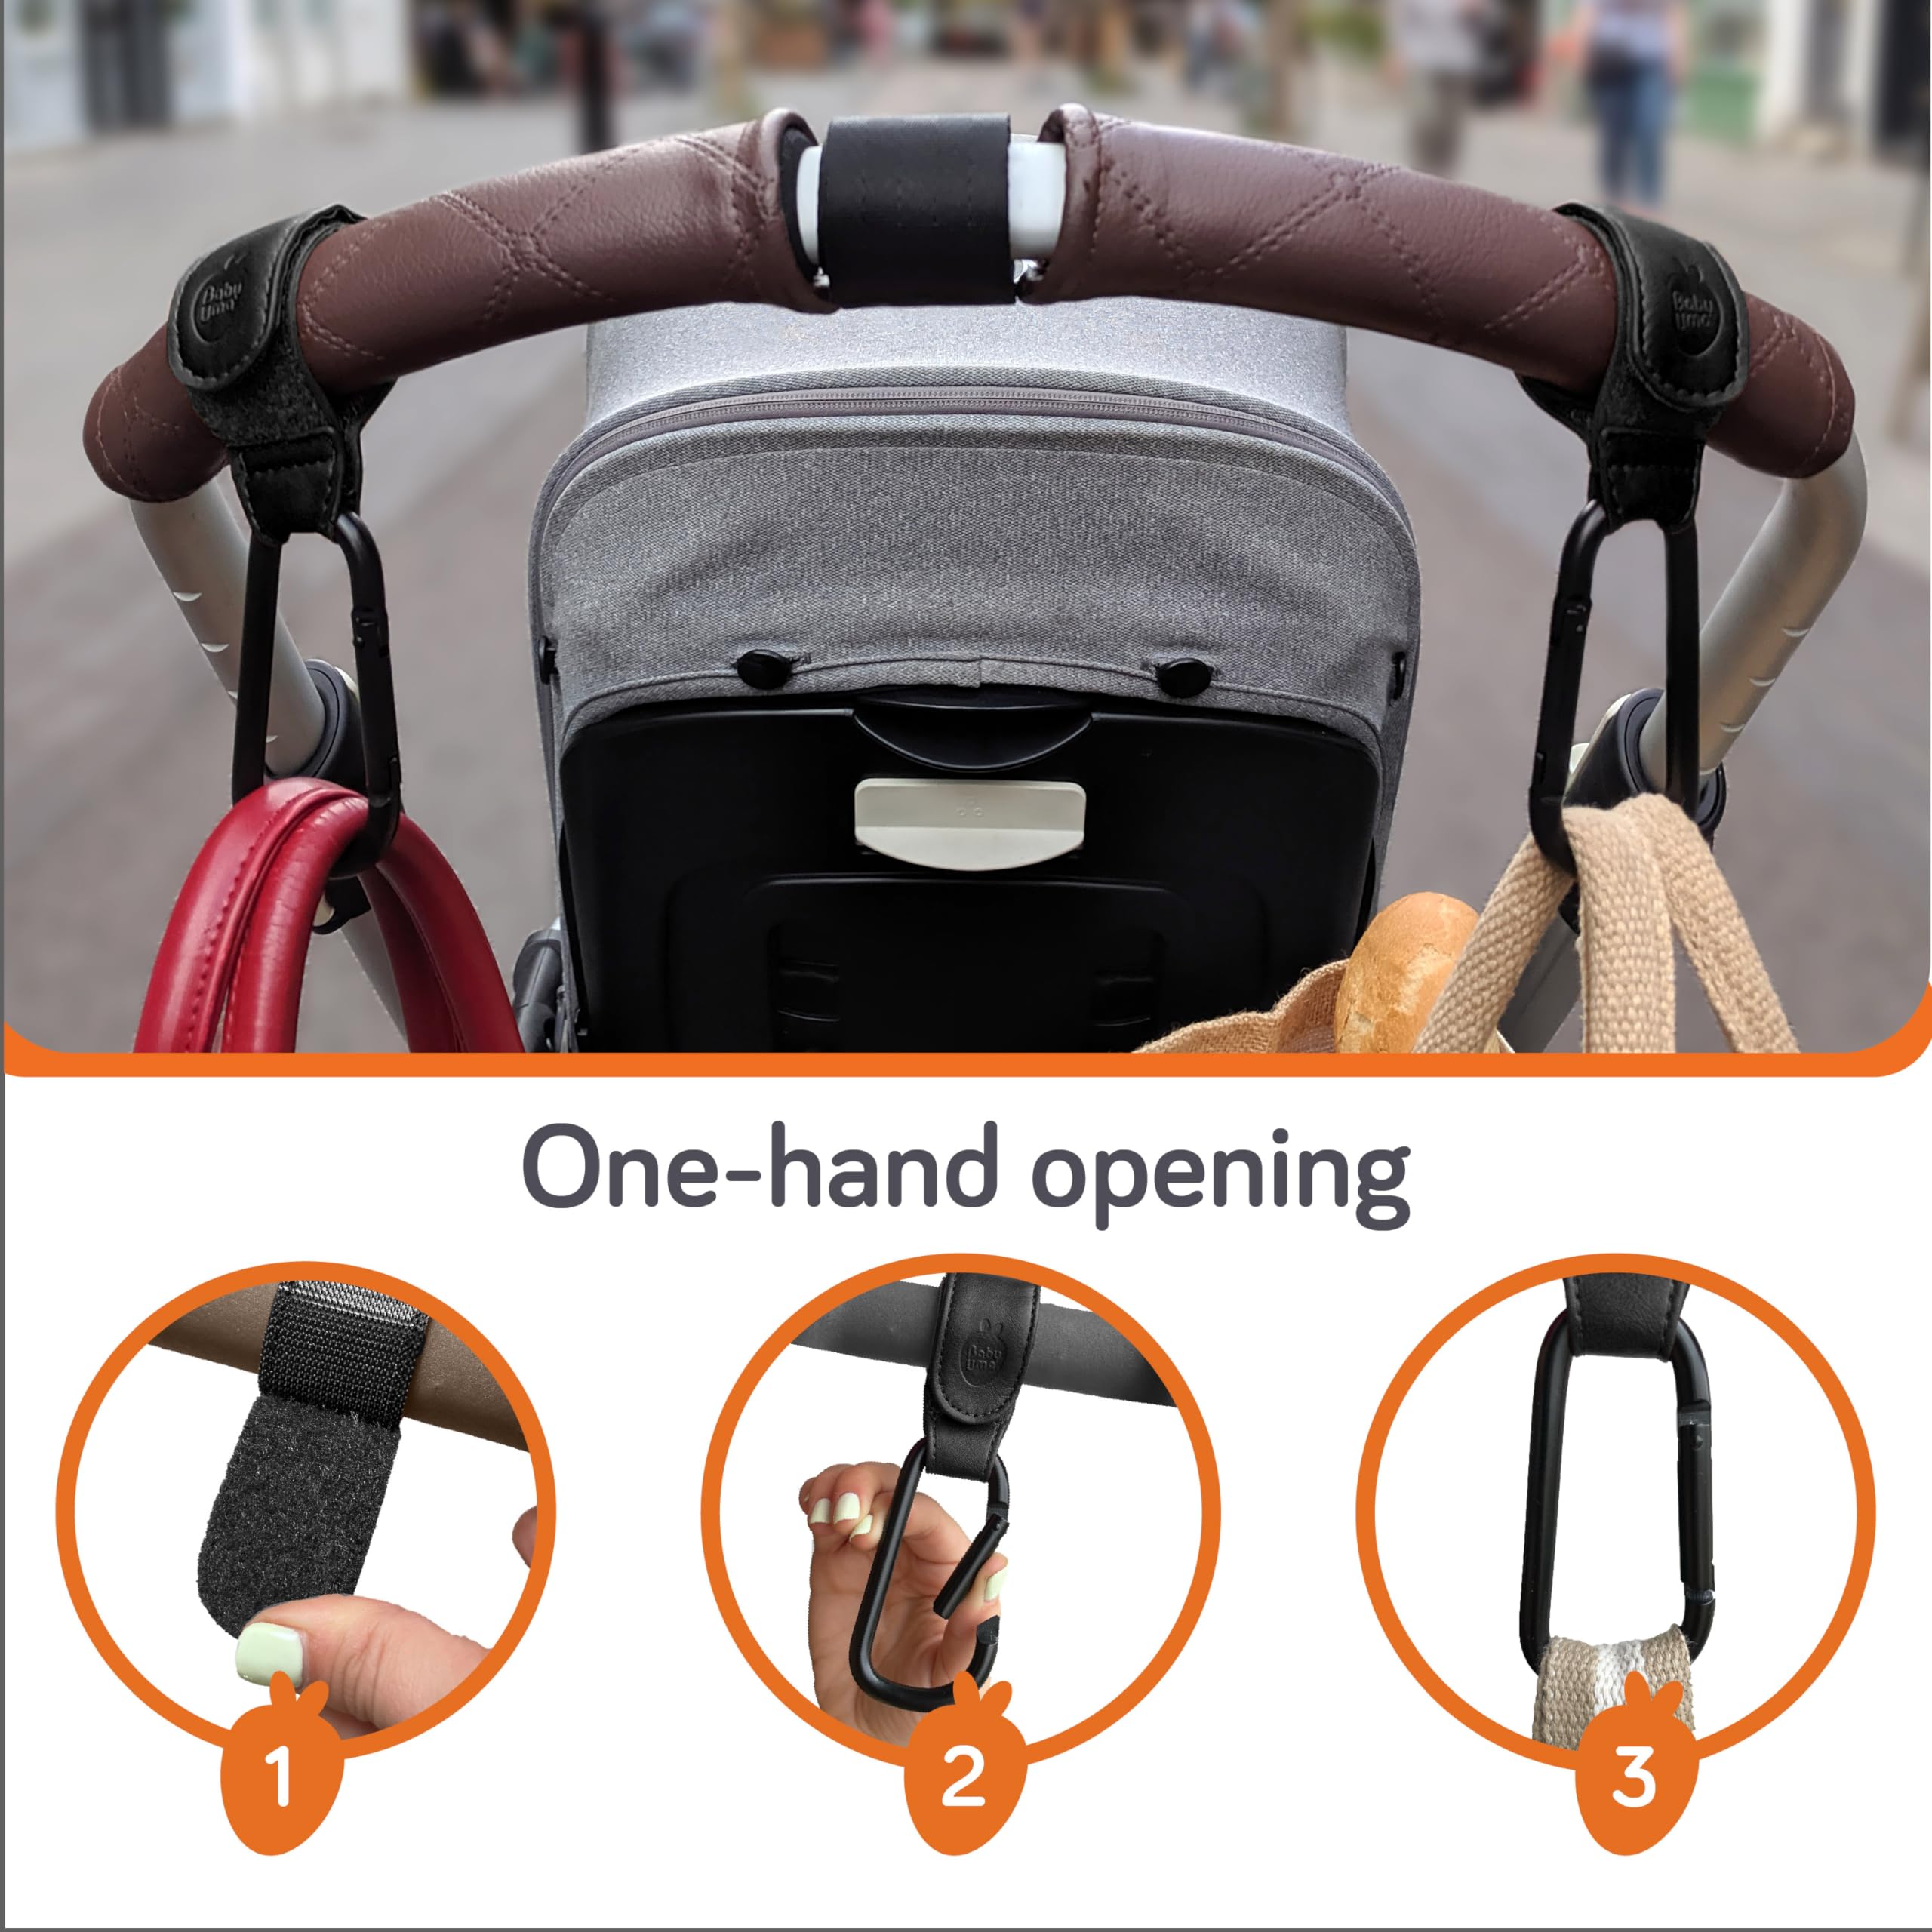 Baby Uma Leather-Style Buggy Clips - 2-Pack of Universal Pram Clips, Non-Slip Buggy Accessories, Carry up to 5 kg per Buggy Clip, Pram Hooks for Bags, Shopping & Baby Travel Essentials (Black)